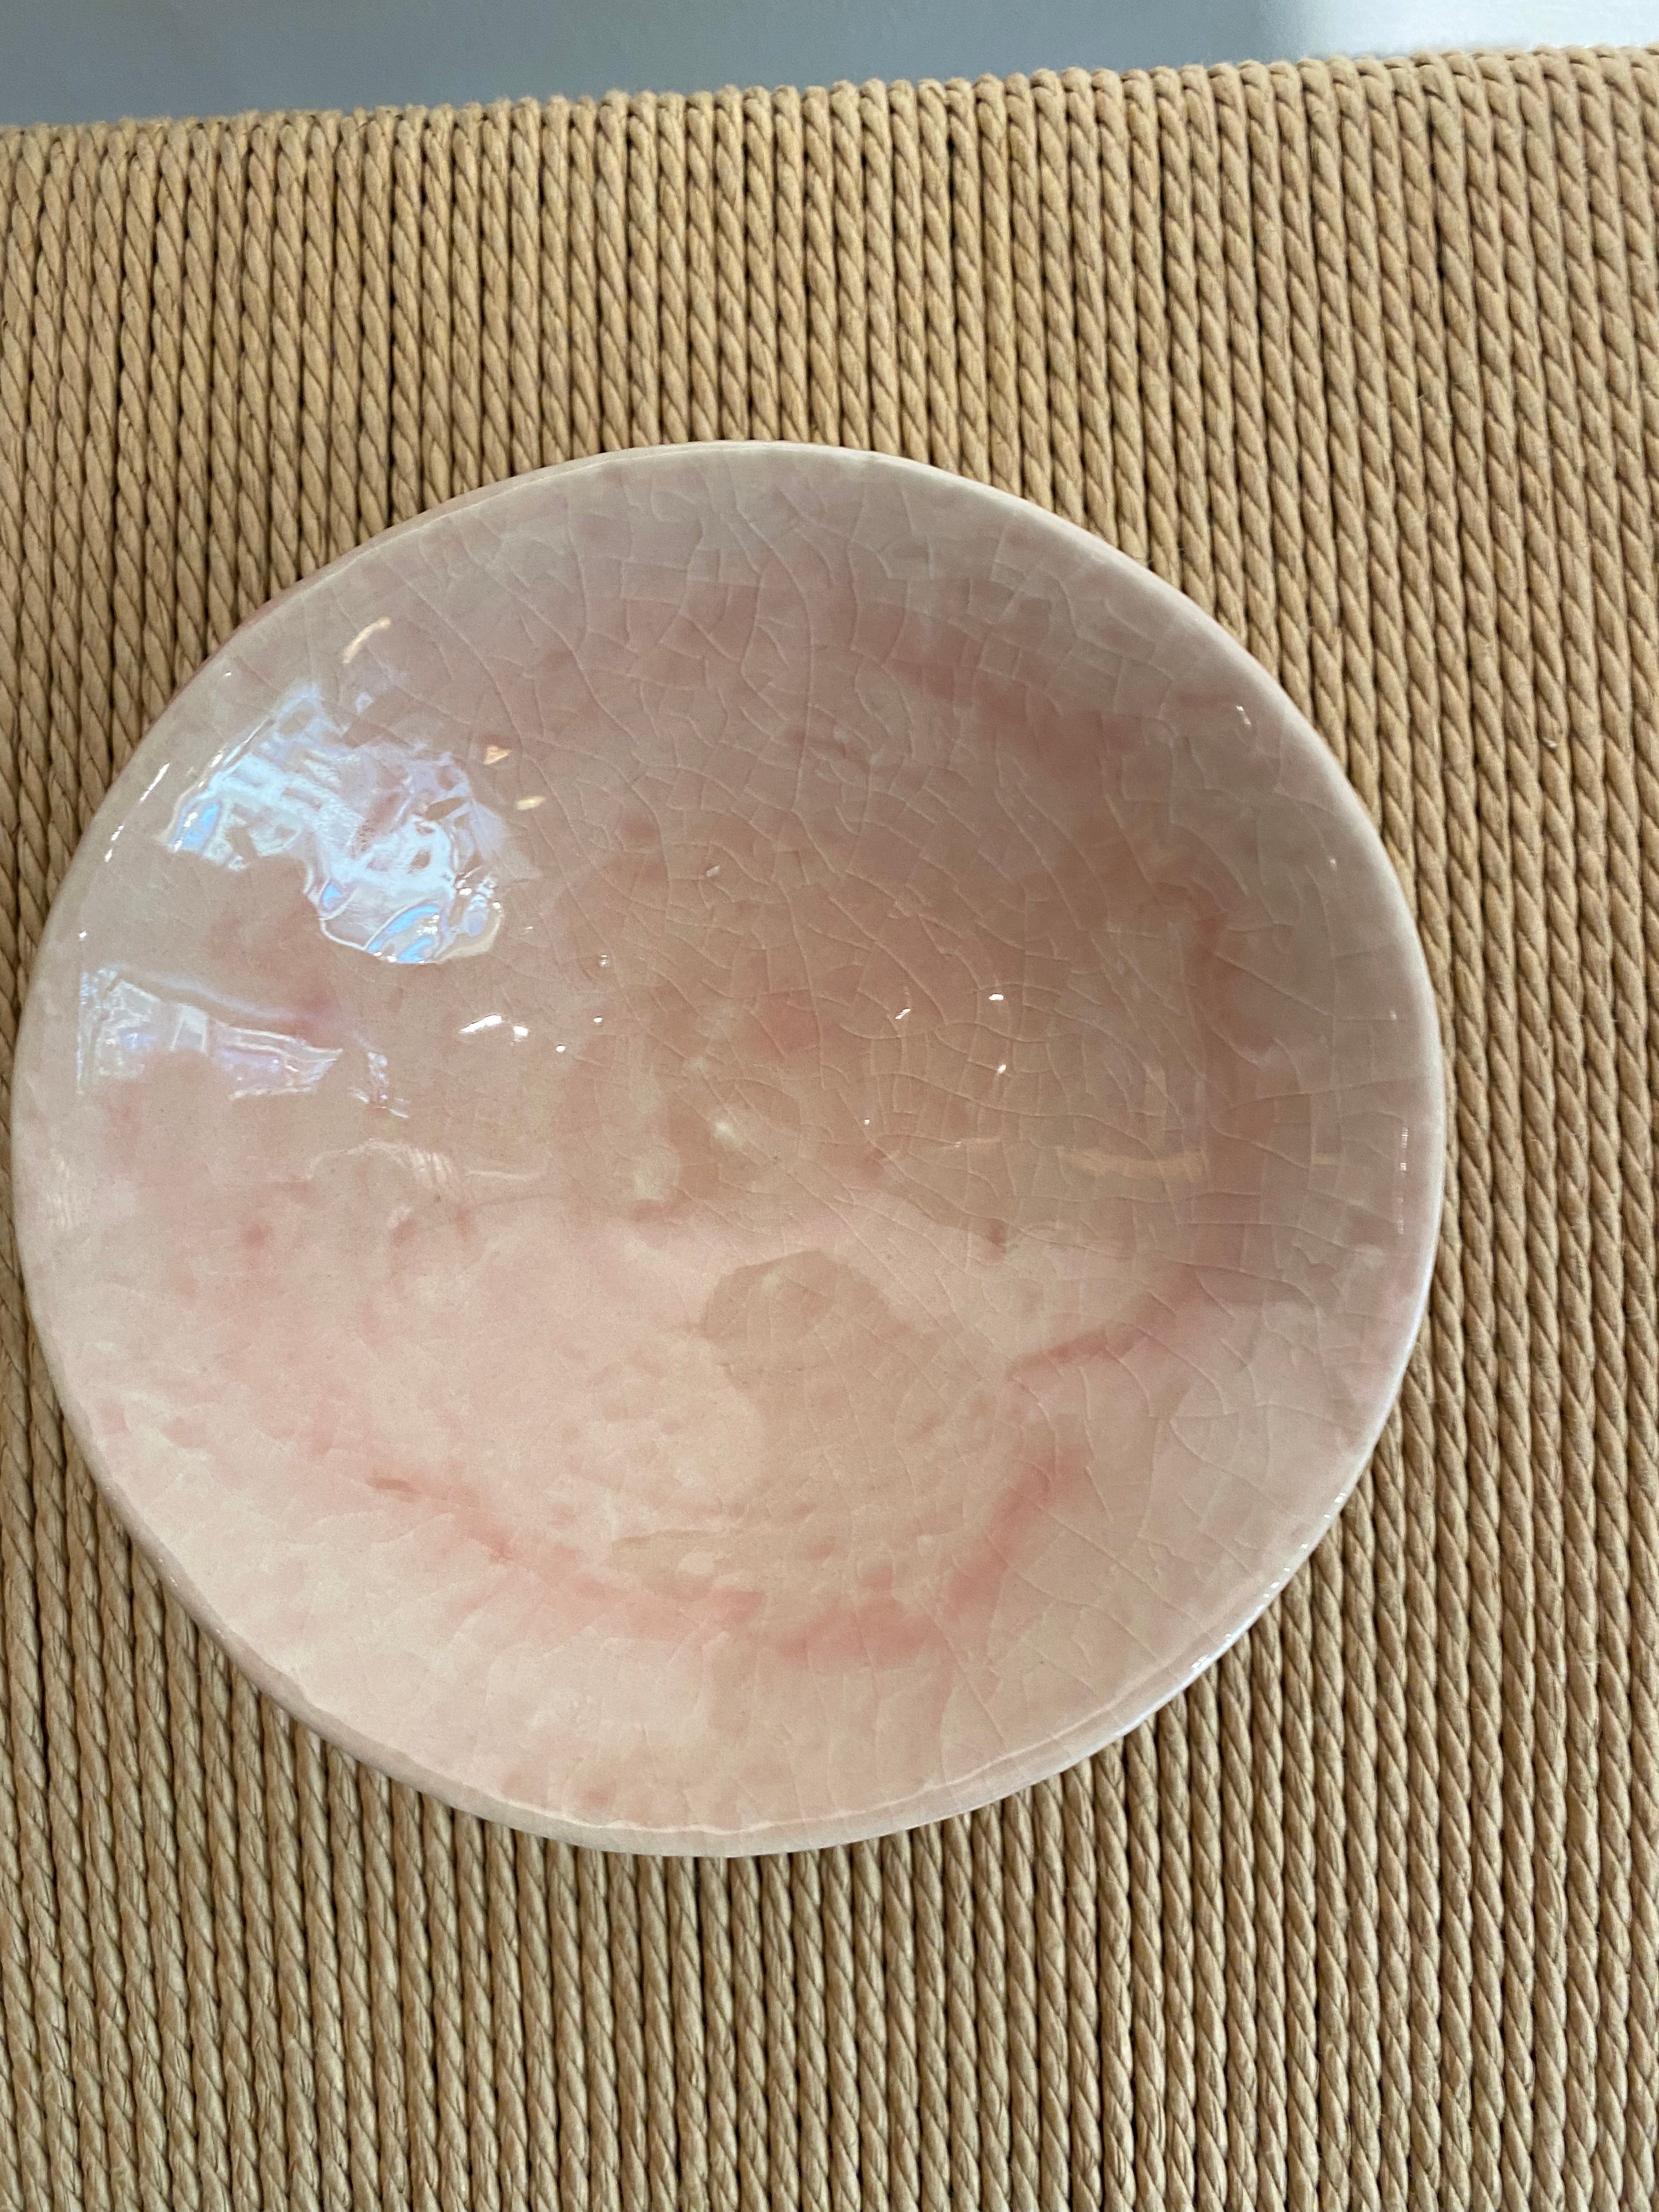 Bowl with pink glaze and cracked texture